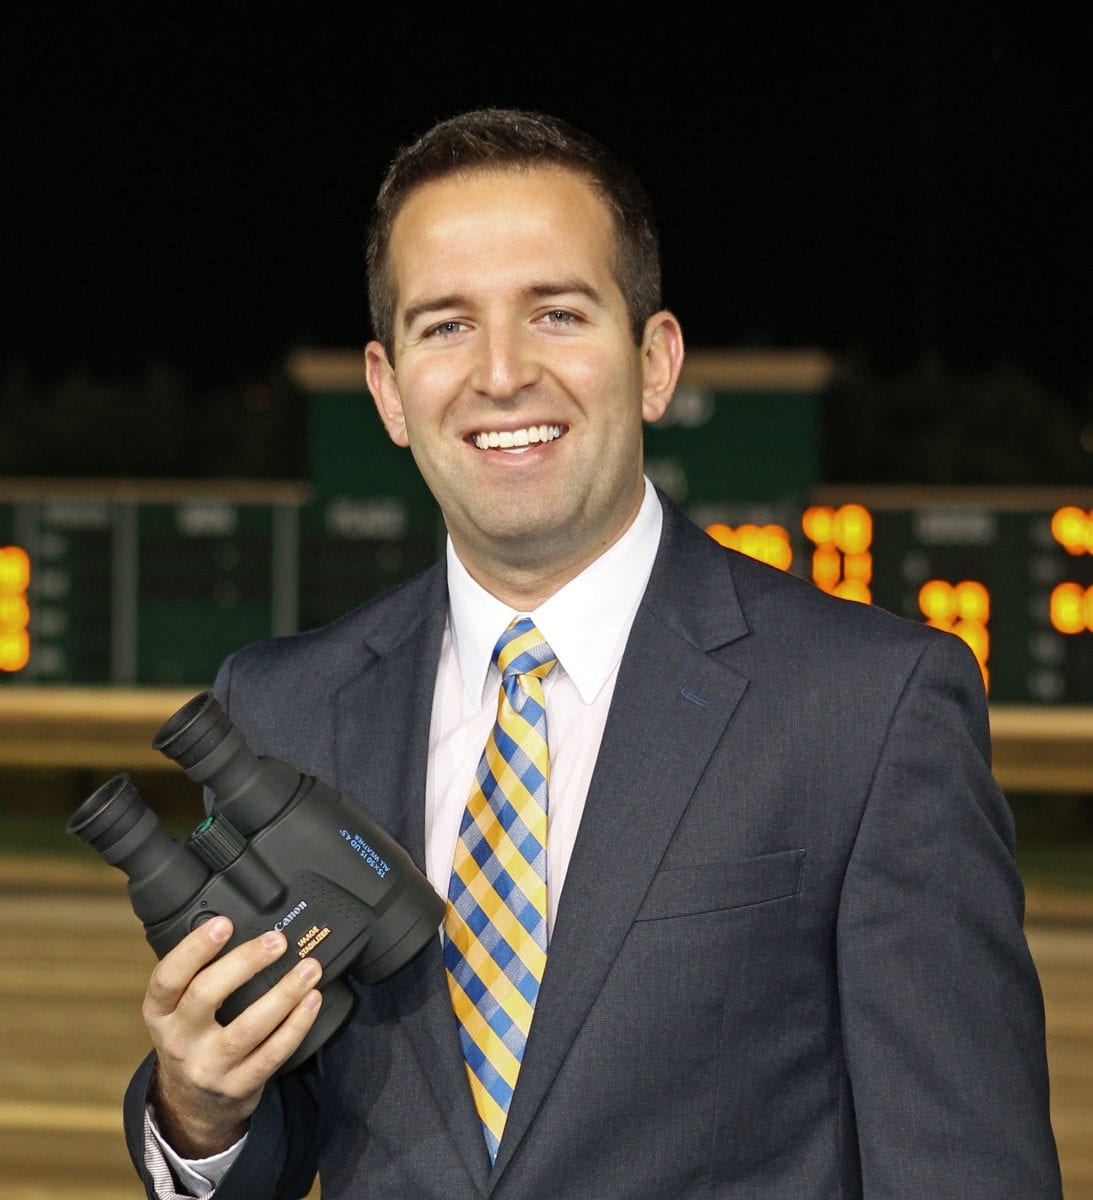 Paul Espinosa to be new Charles Town announcer